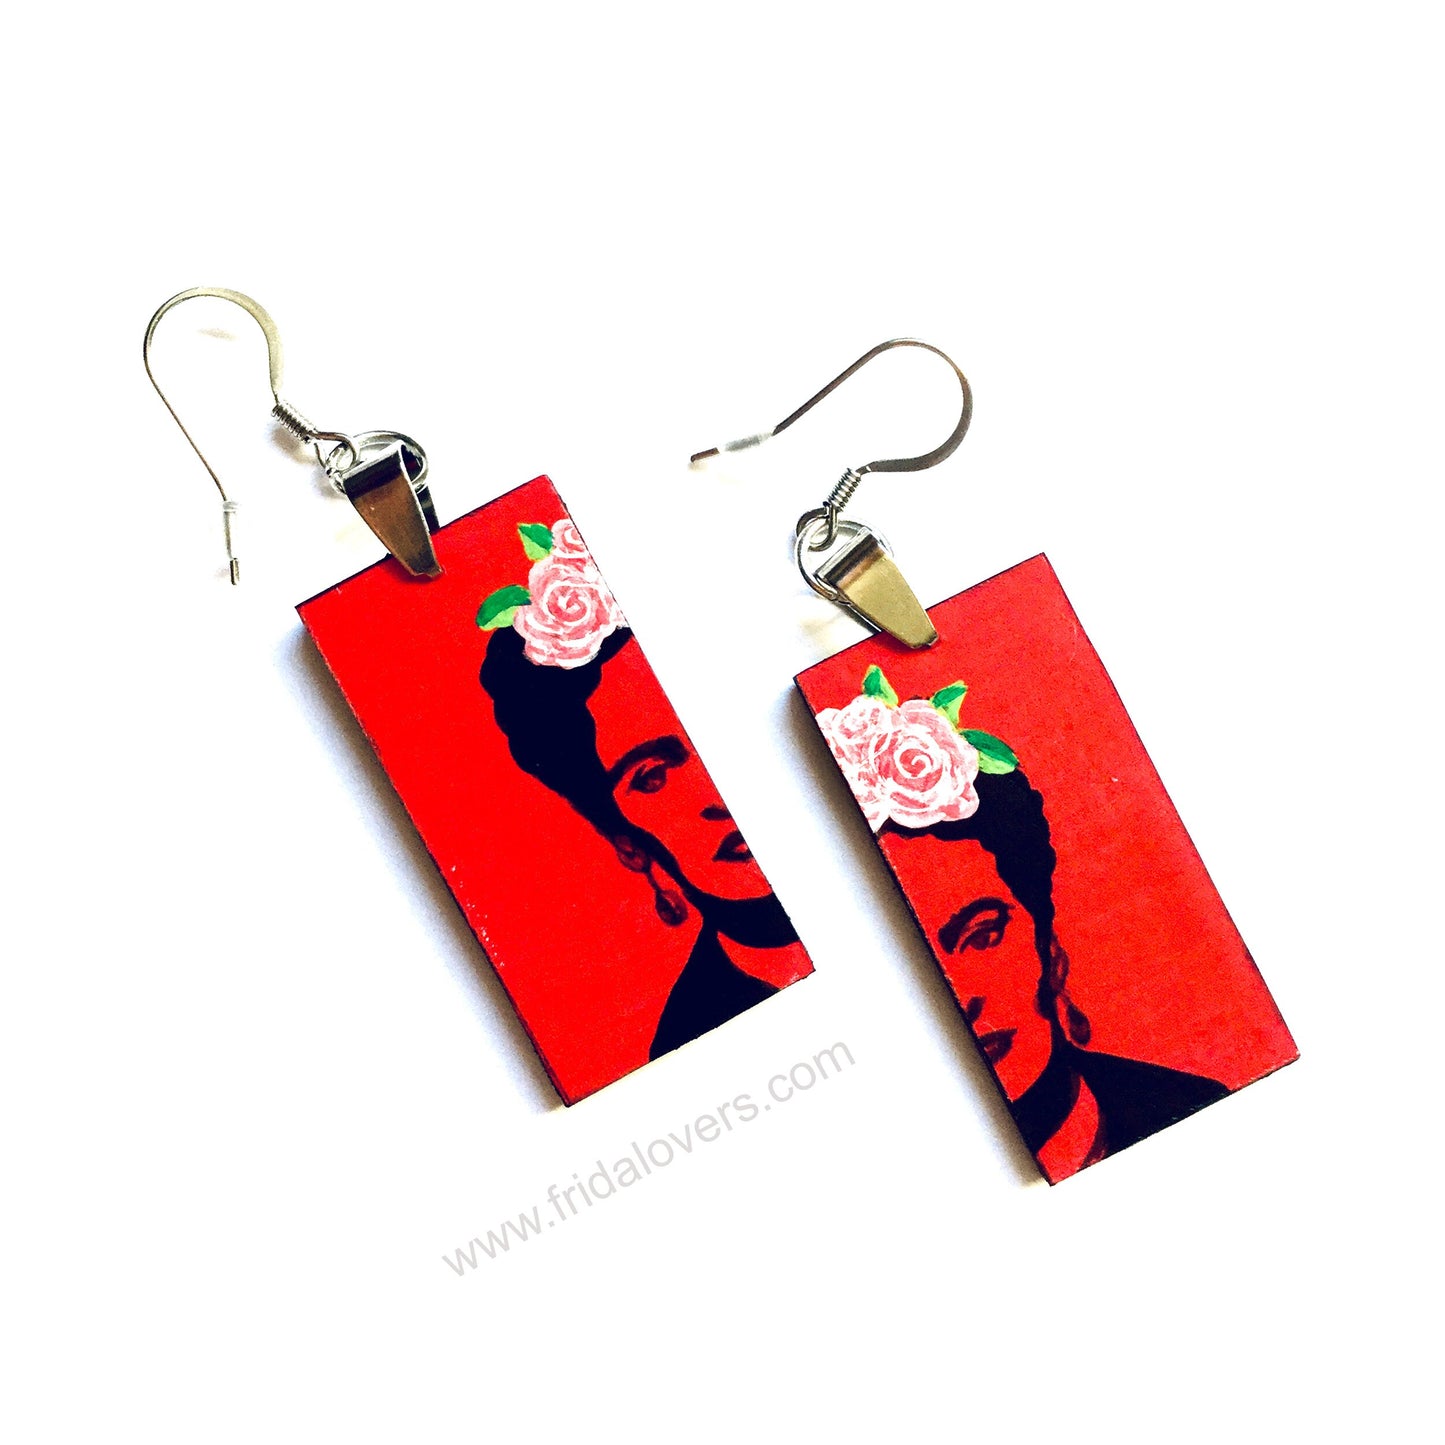 Red Frida Earrings Hand Painted Wooden Frida Earrings Stencil Art Women Dangle Earrings Mexican Jewelry Birthday Fridalovers Gift Fridamania